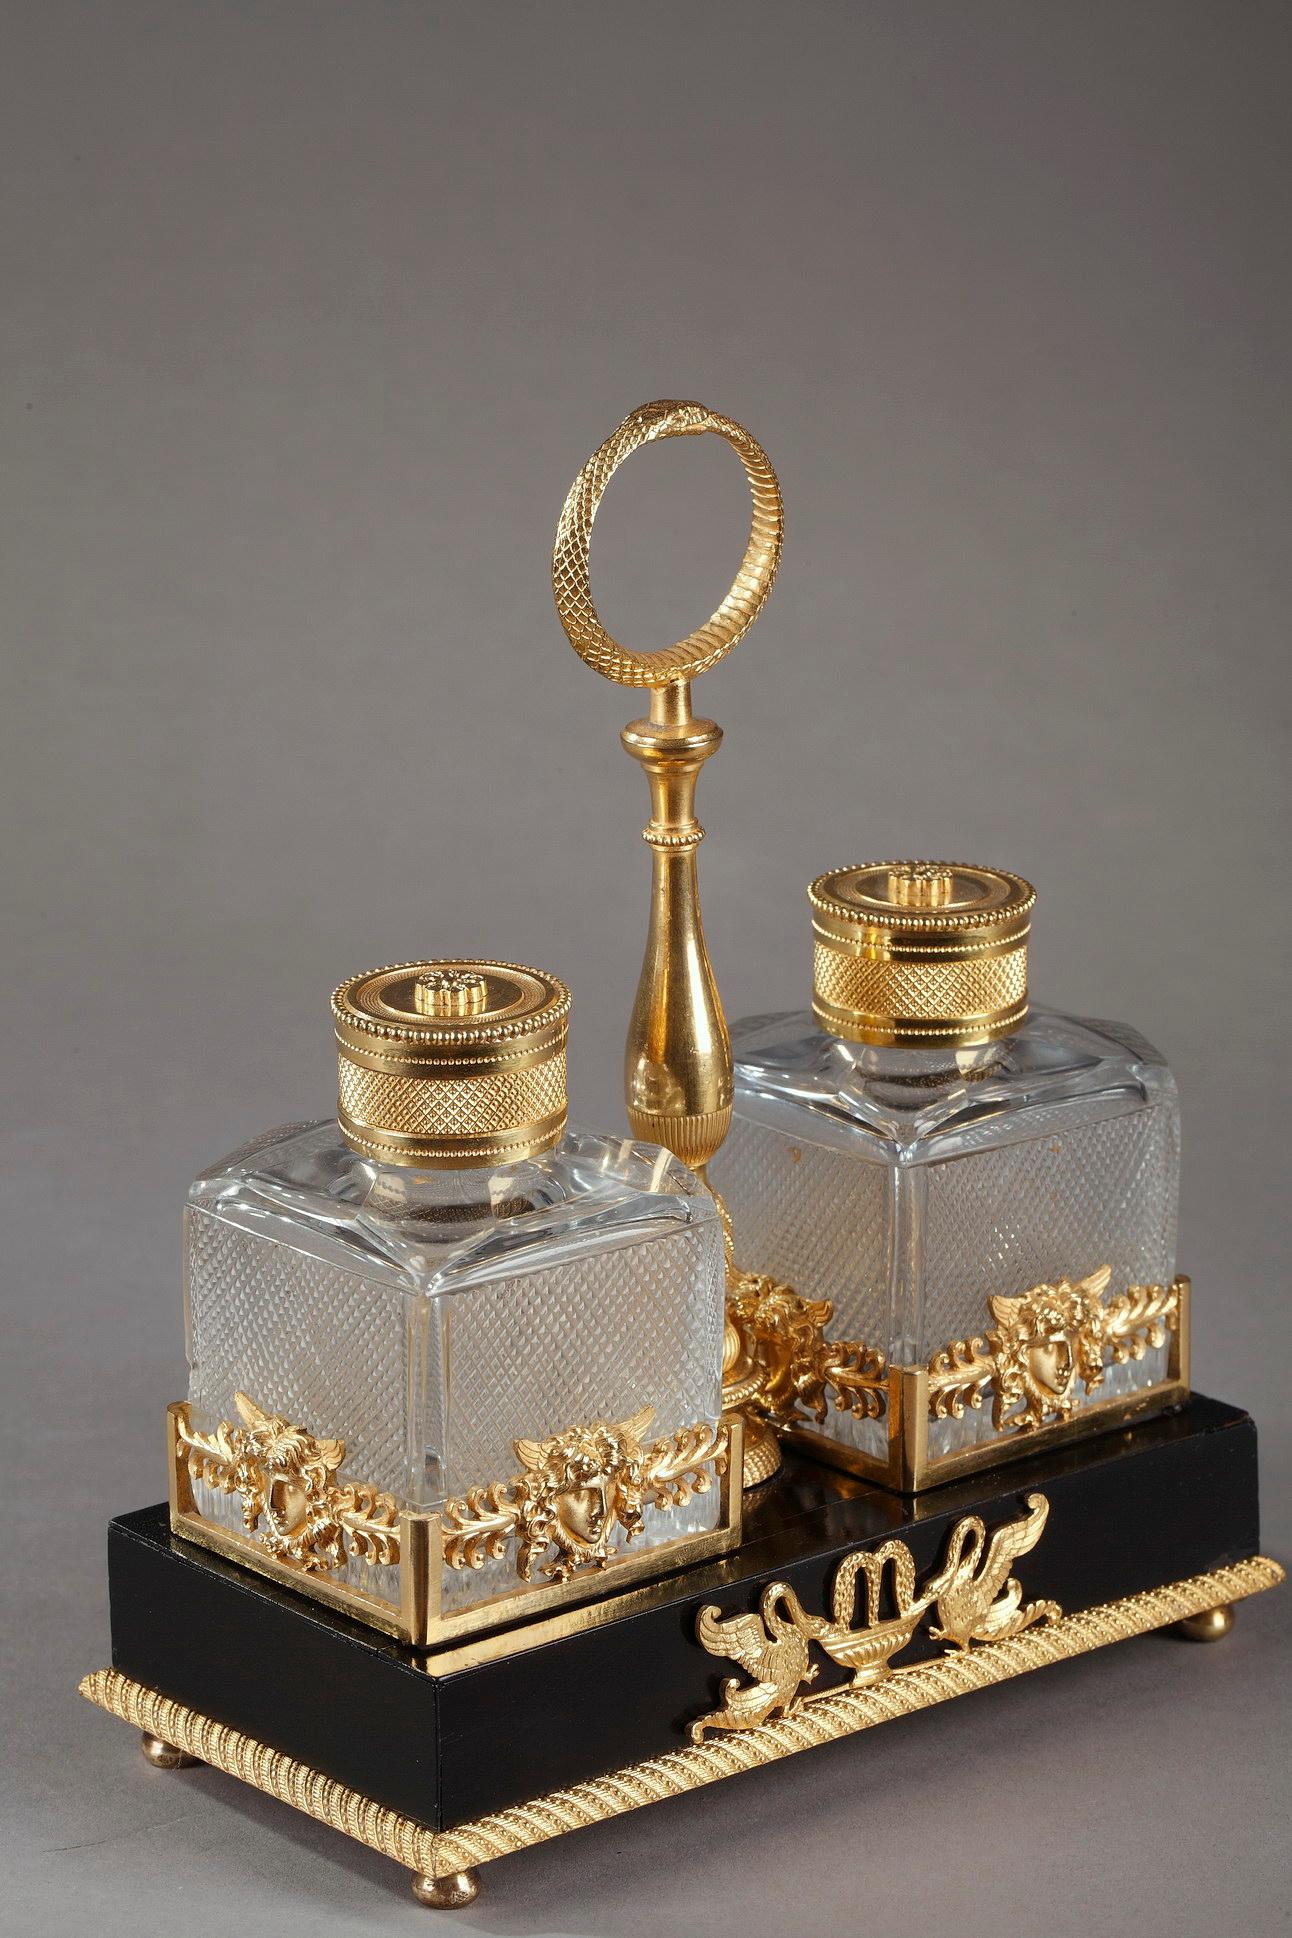 Gilt Early 19th Century Empire Inkstand